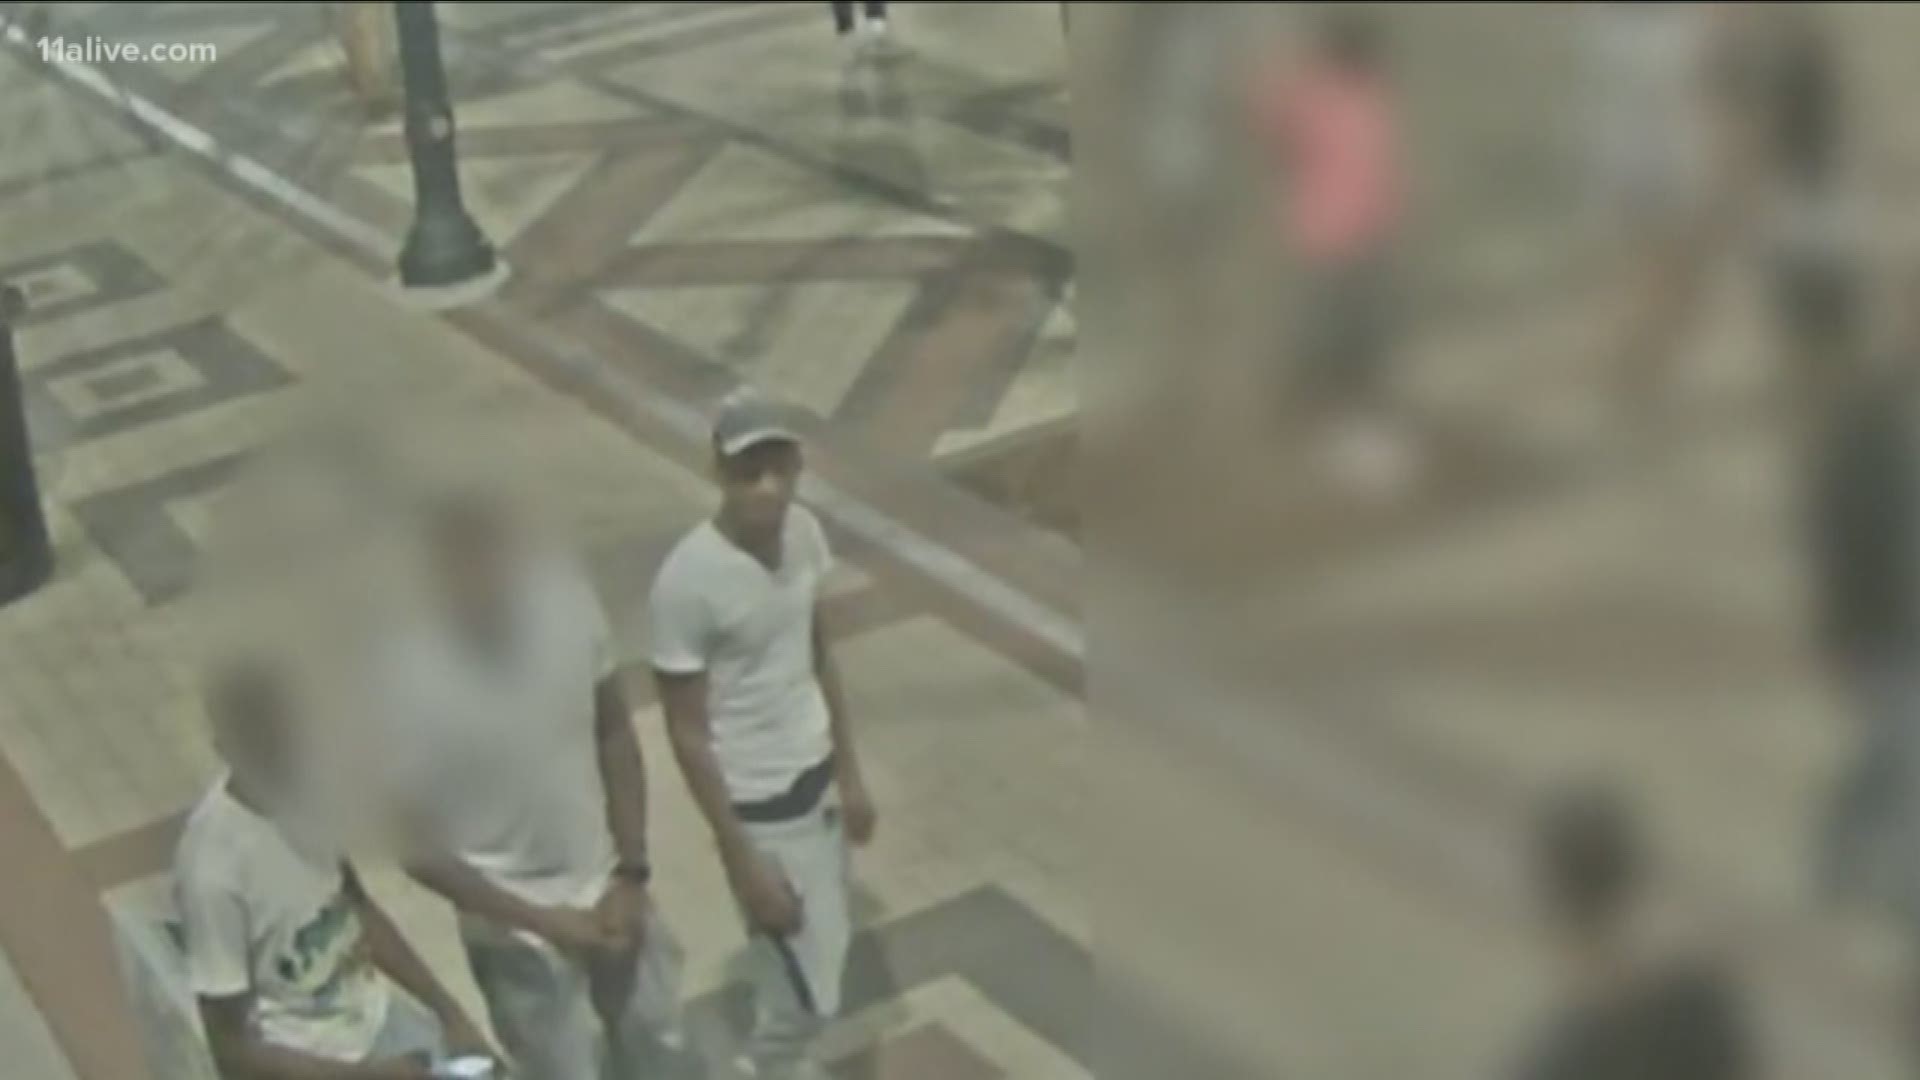 Police believed he opened fire in a crowd of students at a AUC block party. There is a $2,000 reward for his arrest.